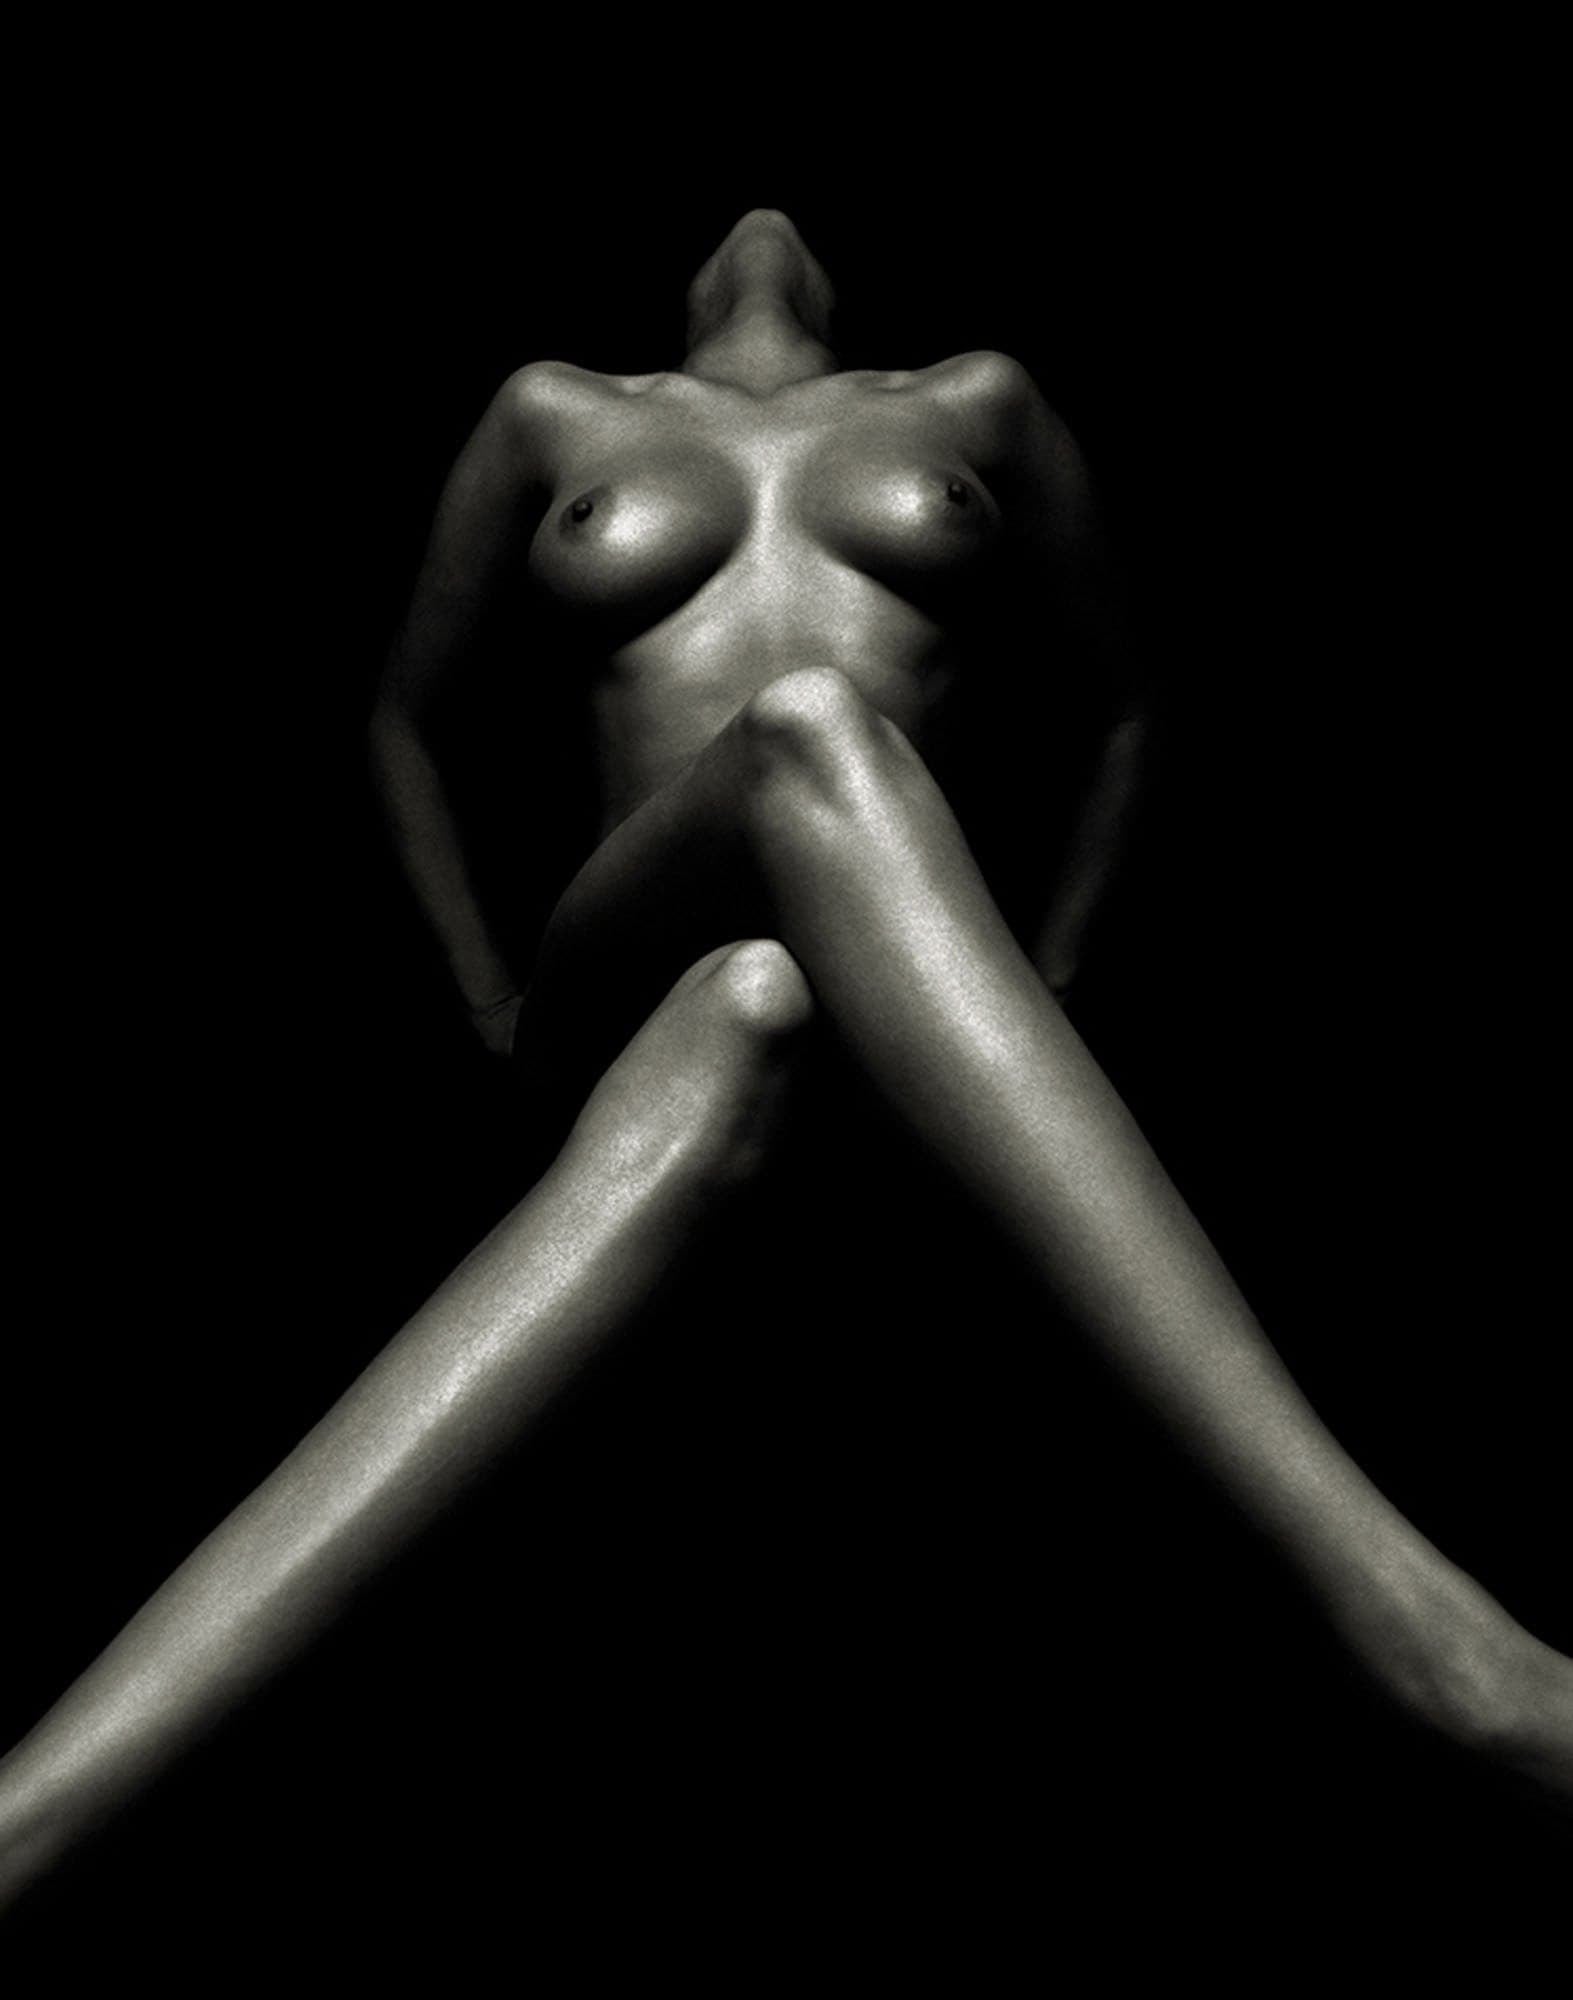 Female nude, Vienna 1 - Petra Gut Contemporary AG Andreas H. Bitesnich